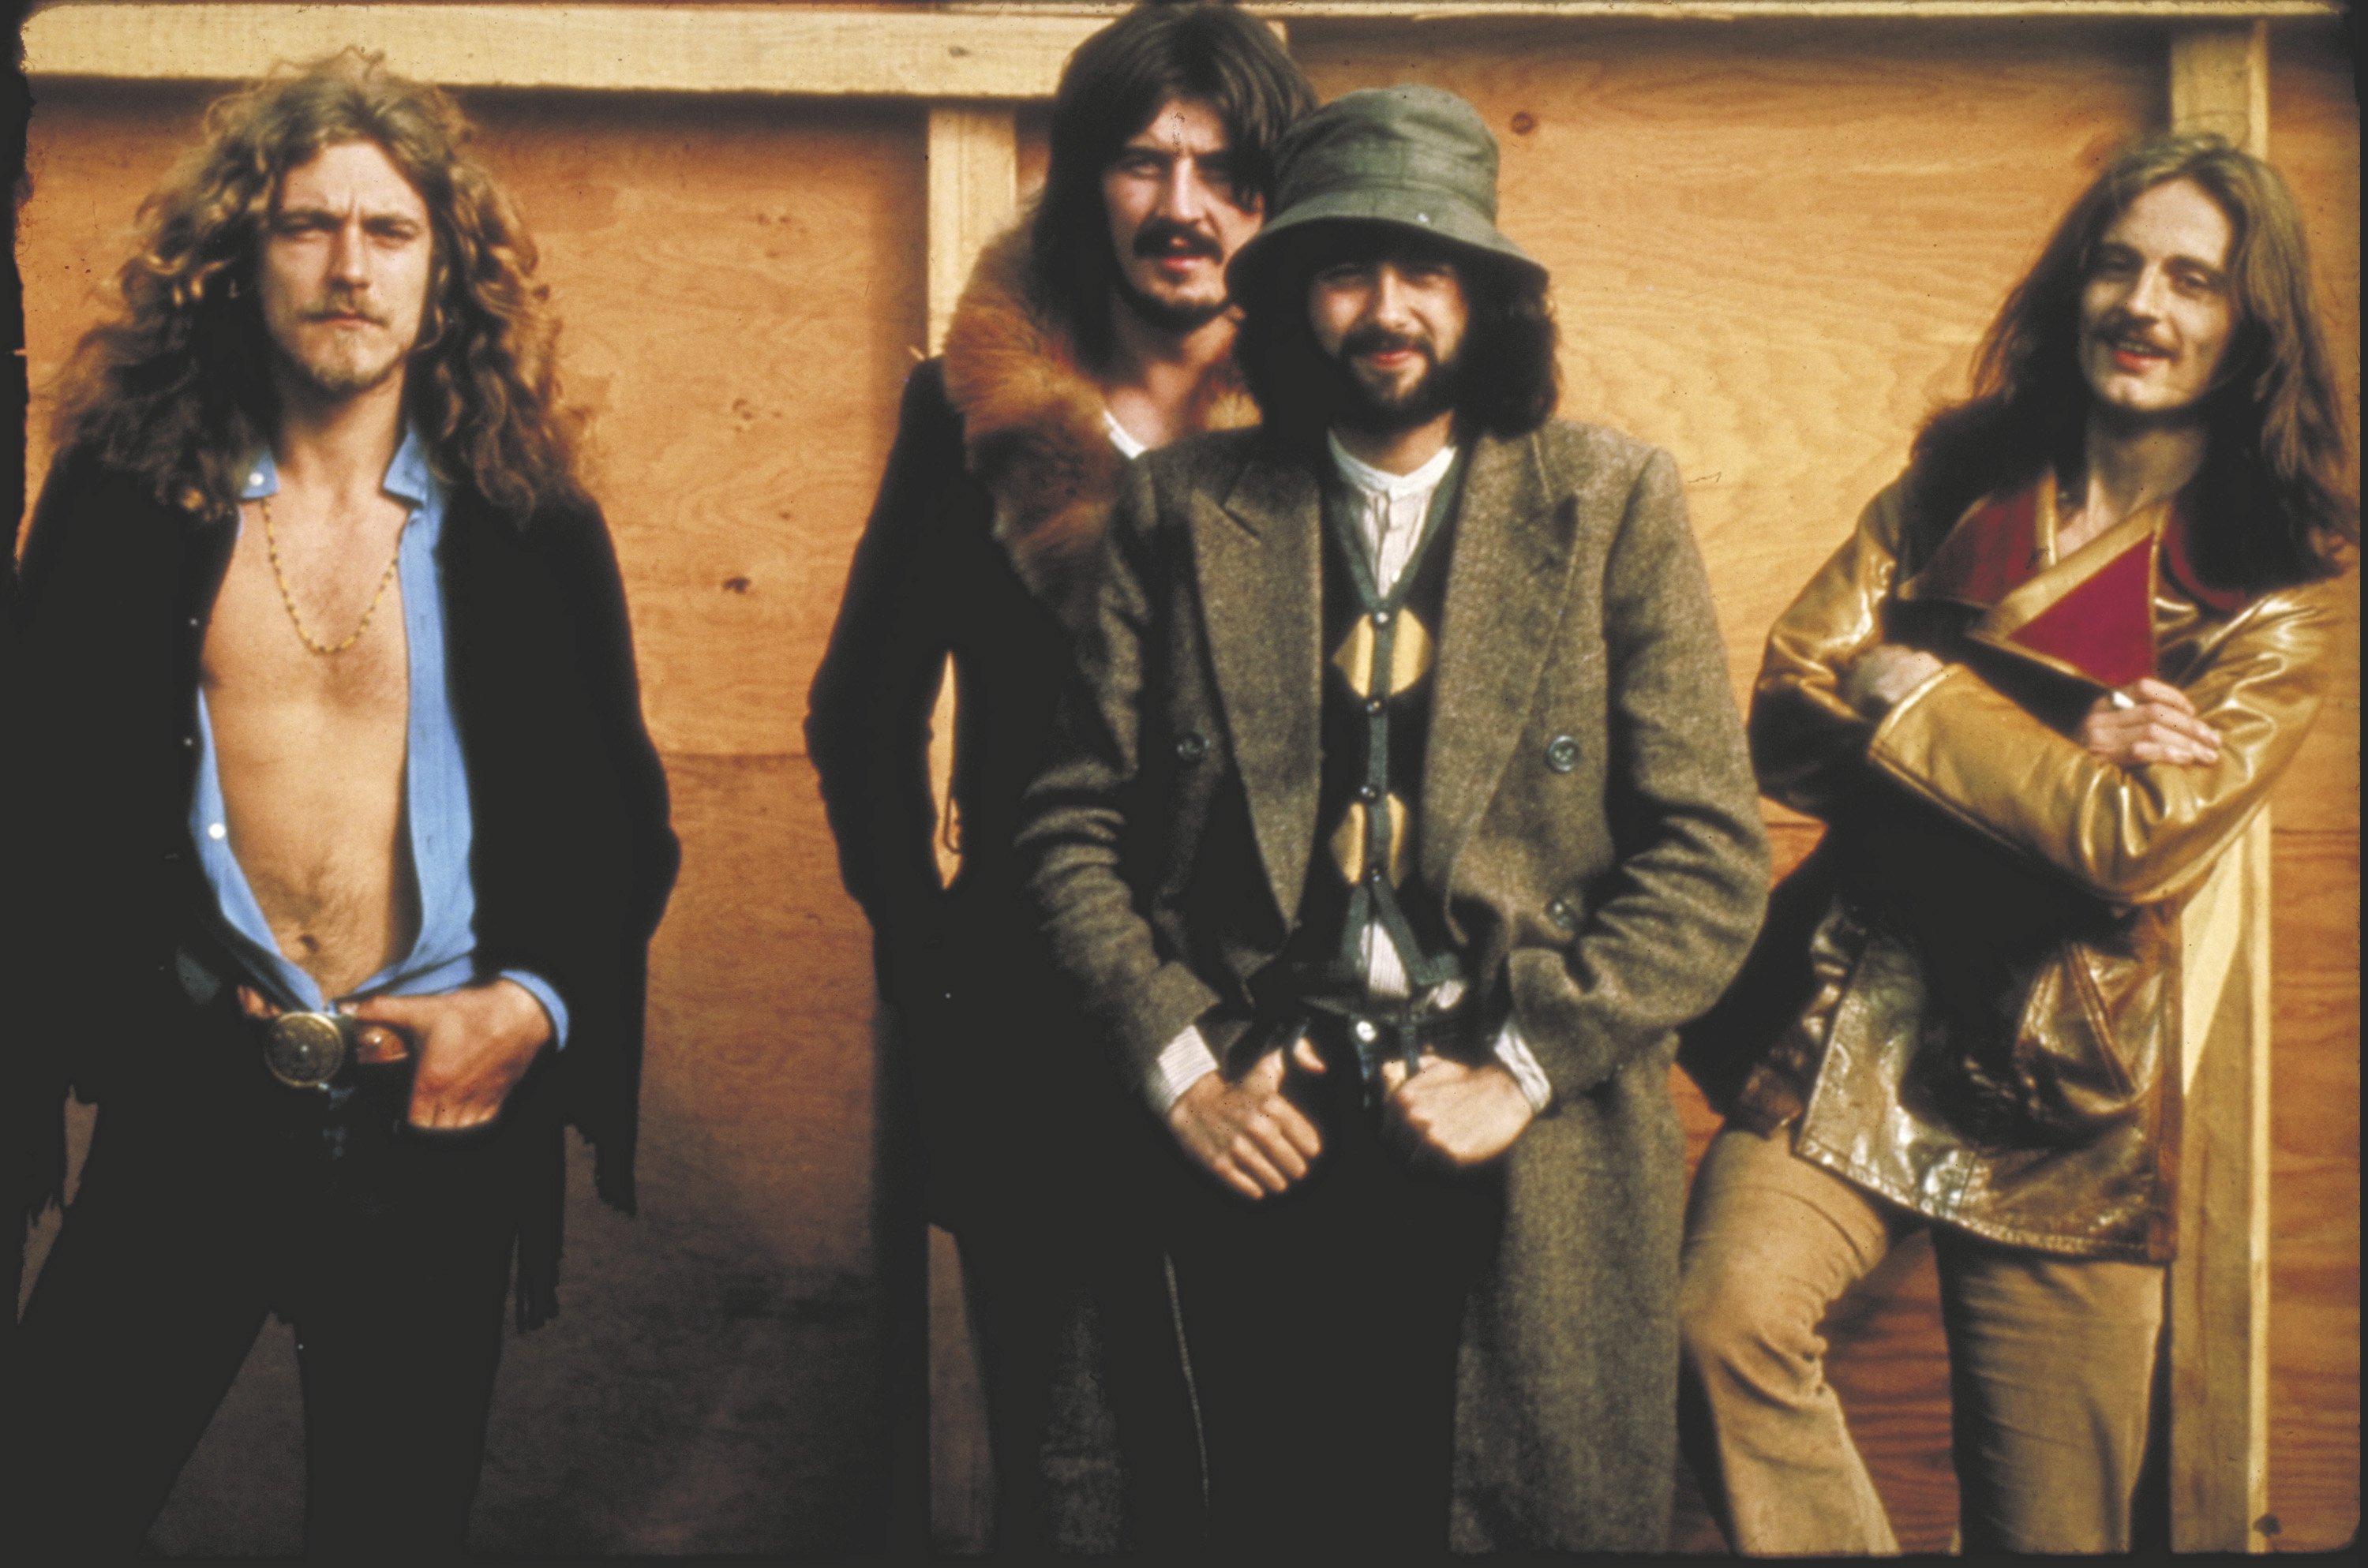 Led Zeppelin photographed in 1969